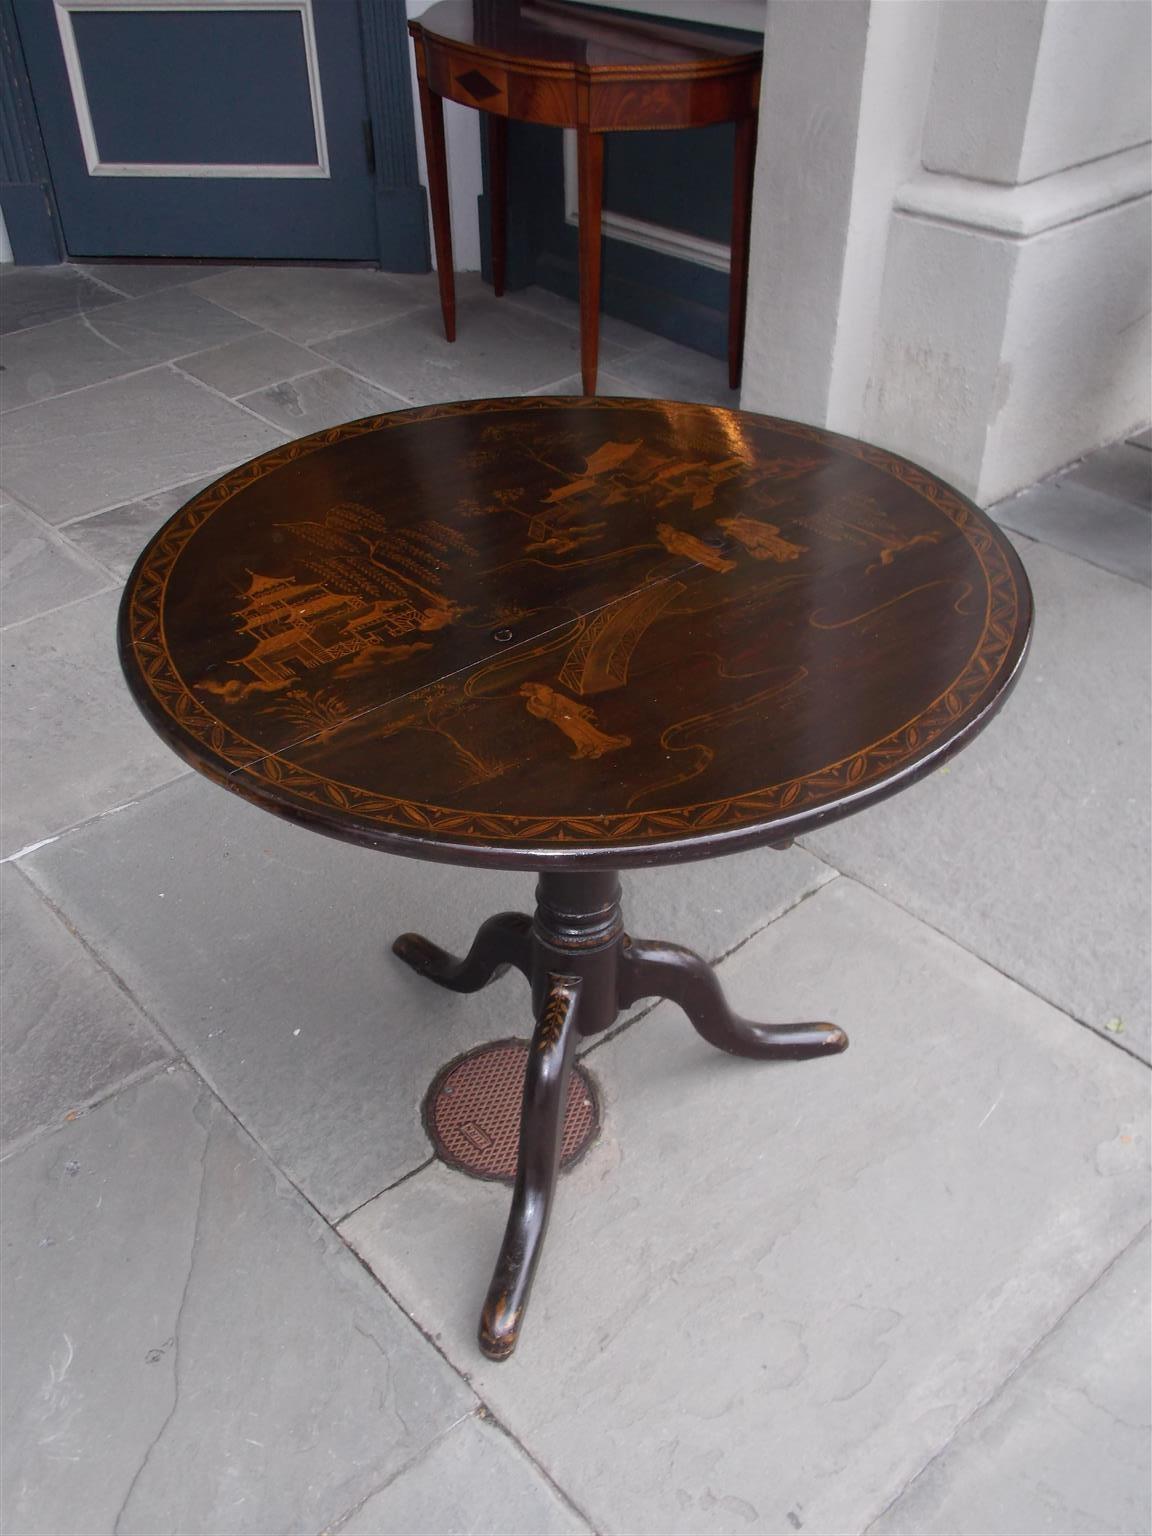 American Colonial American Black Lacquer Japanned Figural Tilt-Top Table, Circa 1770